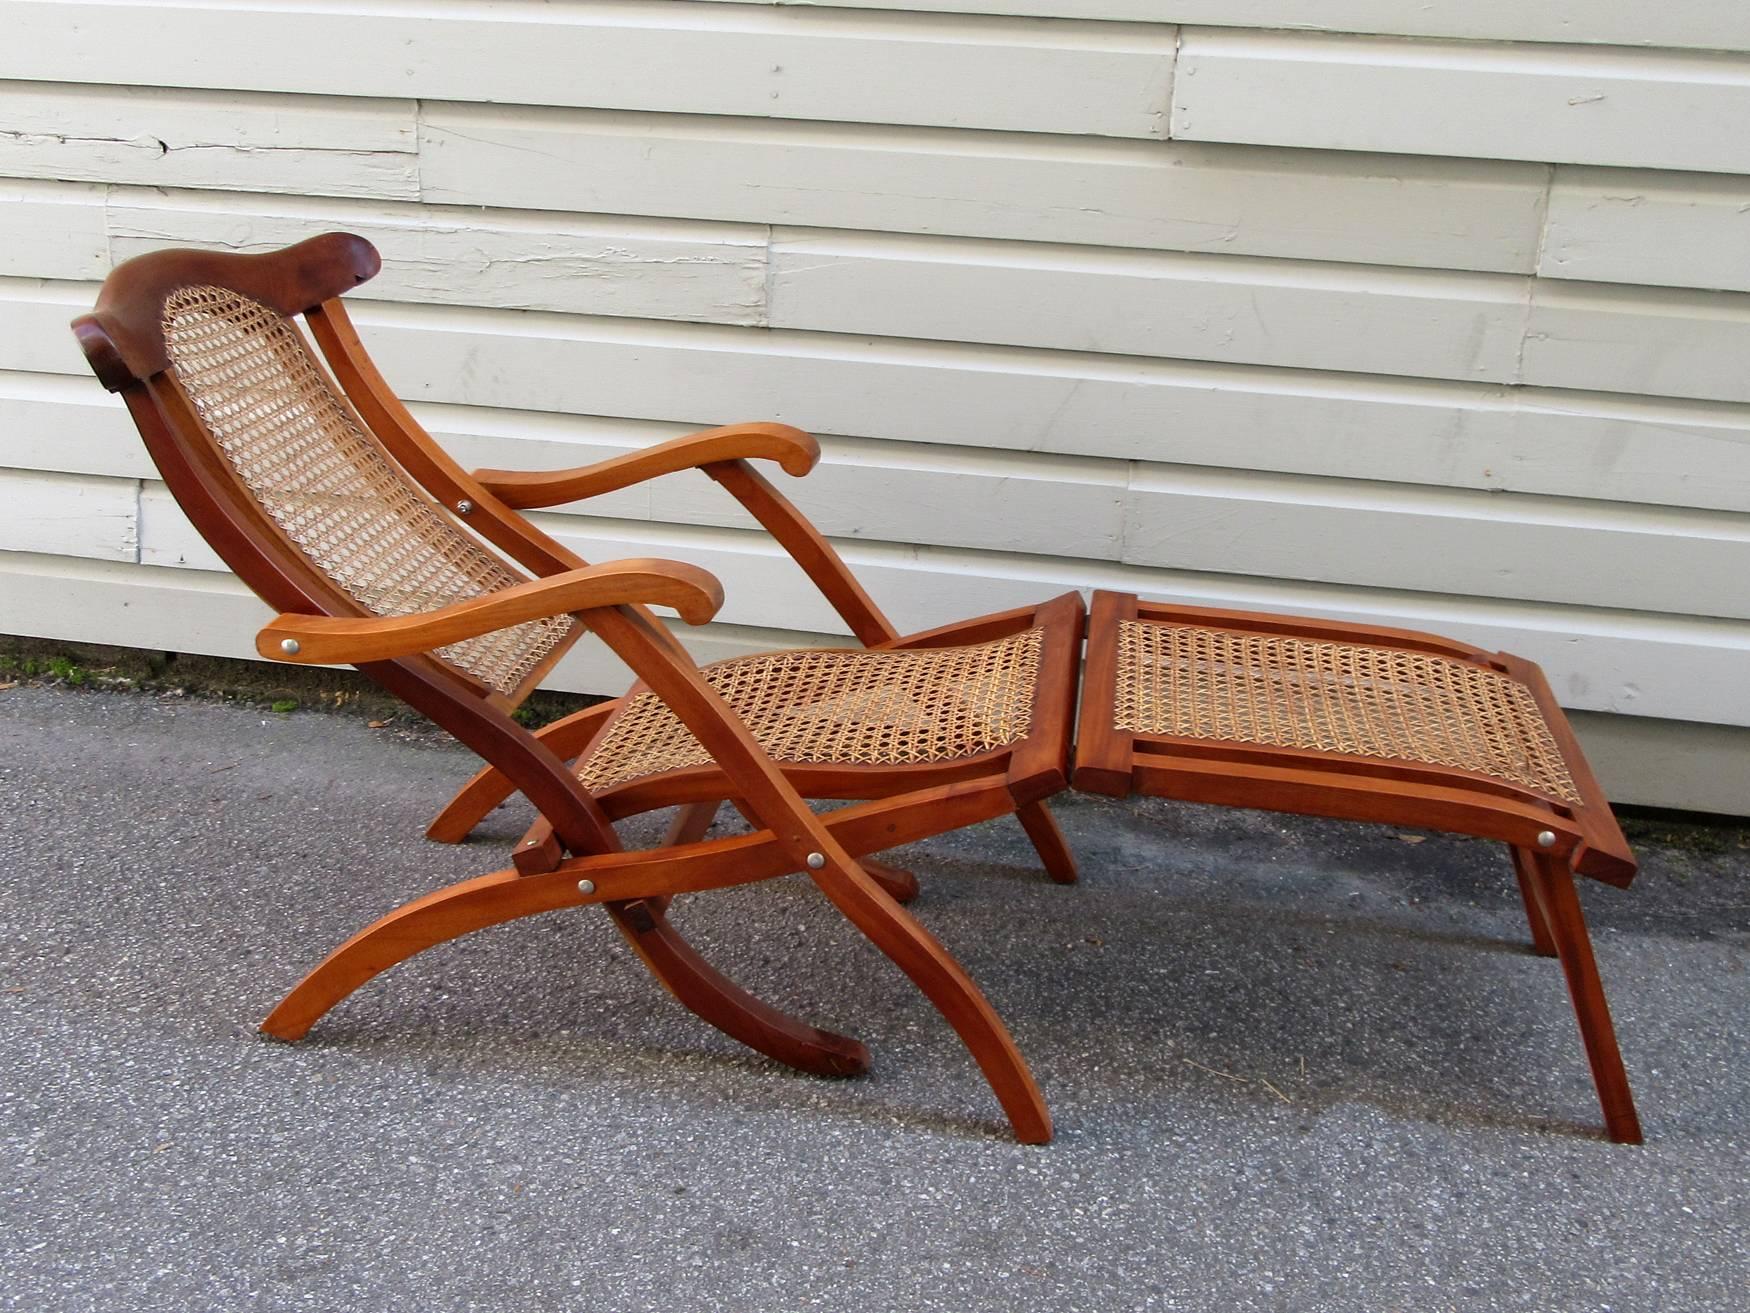 Martinican Early 20th Century Caribbean Martinique Mahogany and Cane Folding Deck Chair